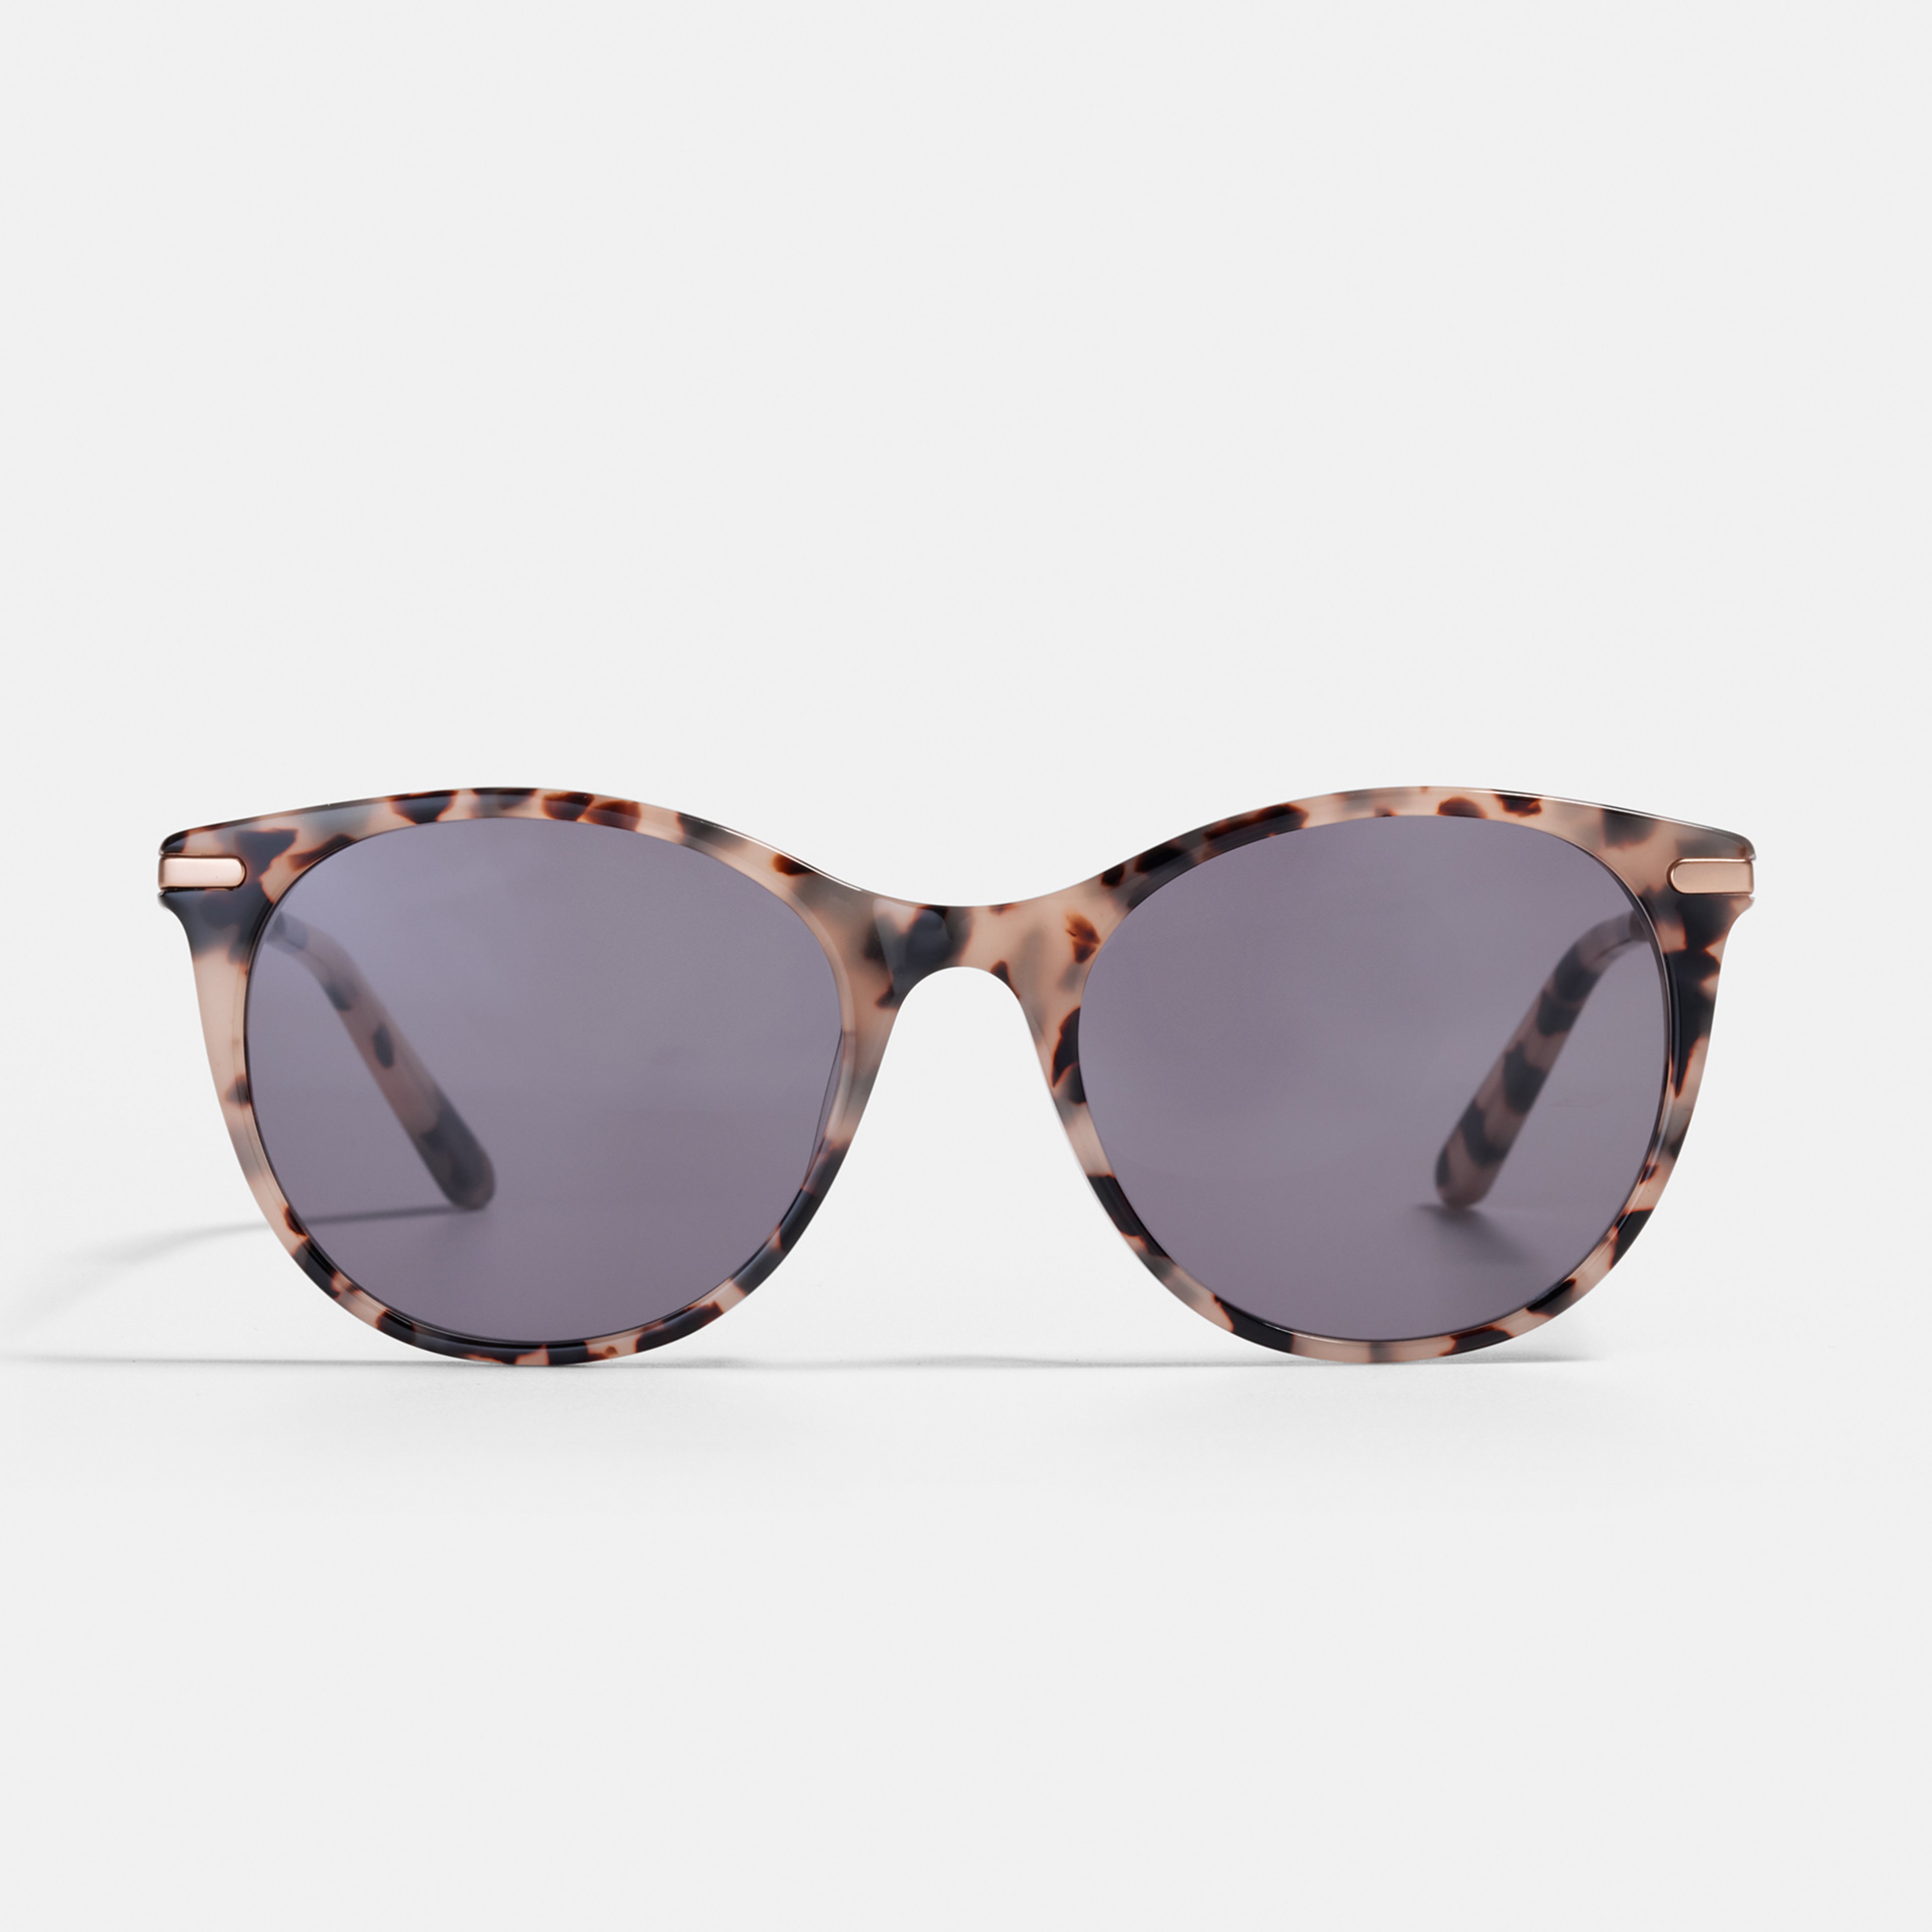 Ace & Tate Sunglasses | Round Metal in Beige, Brown